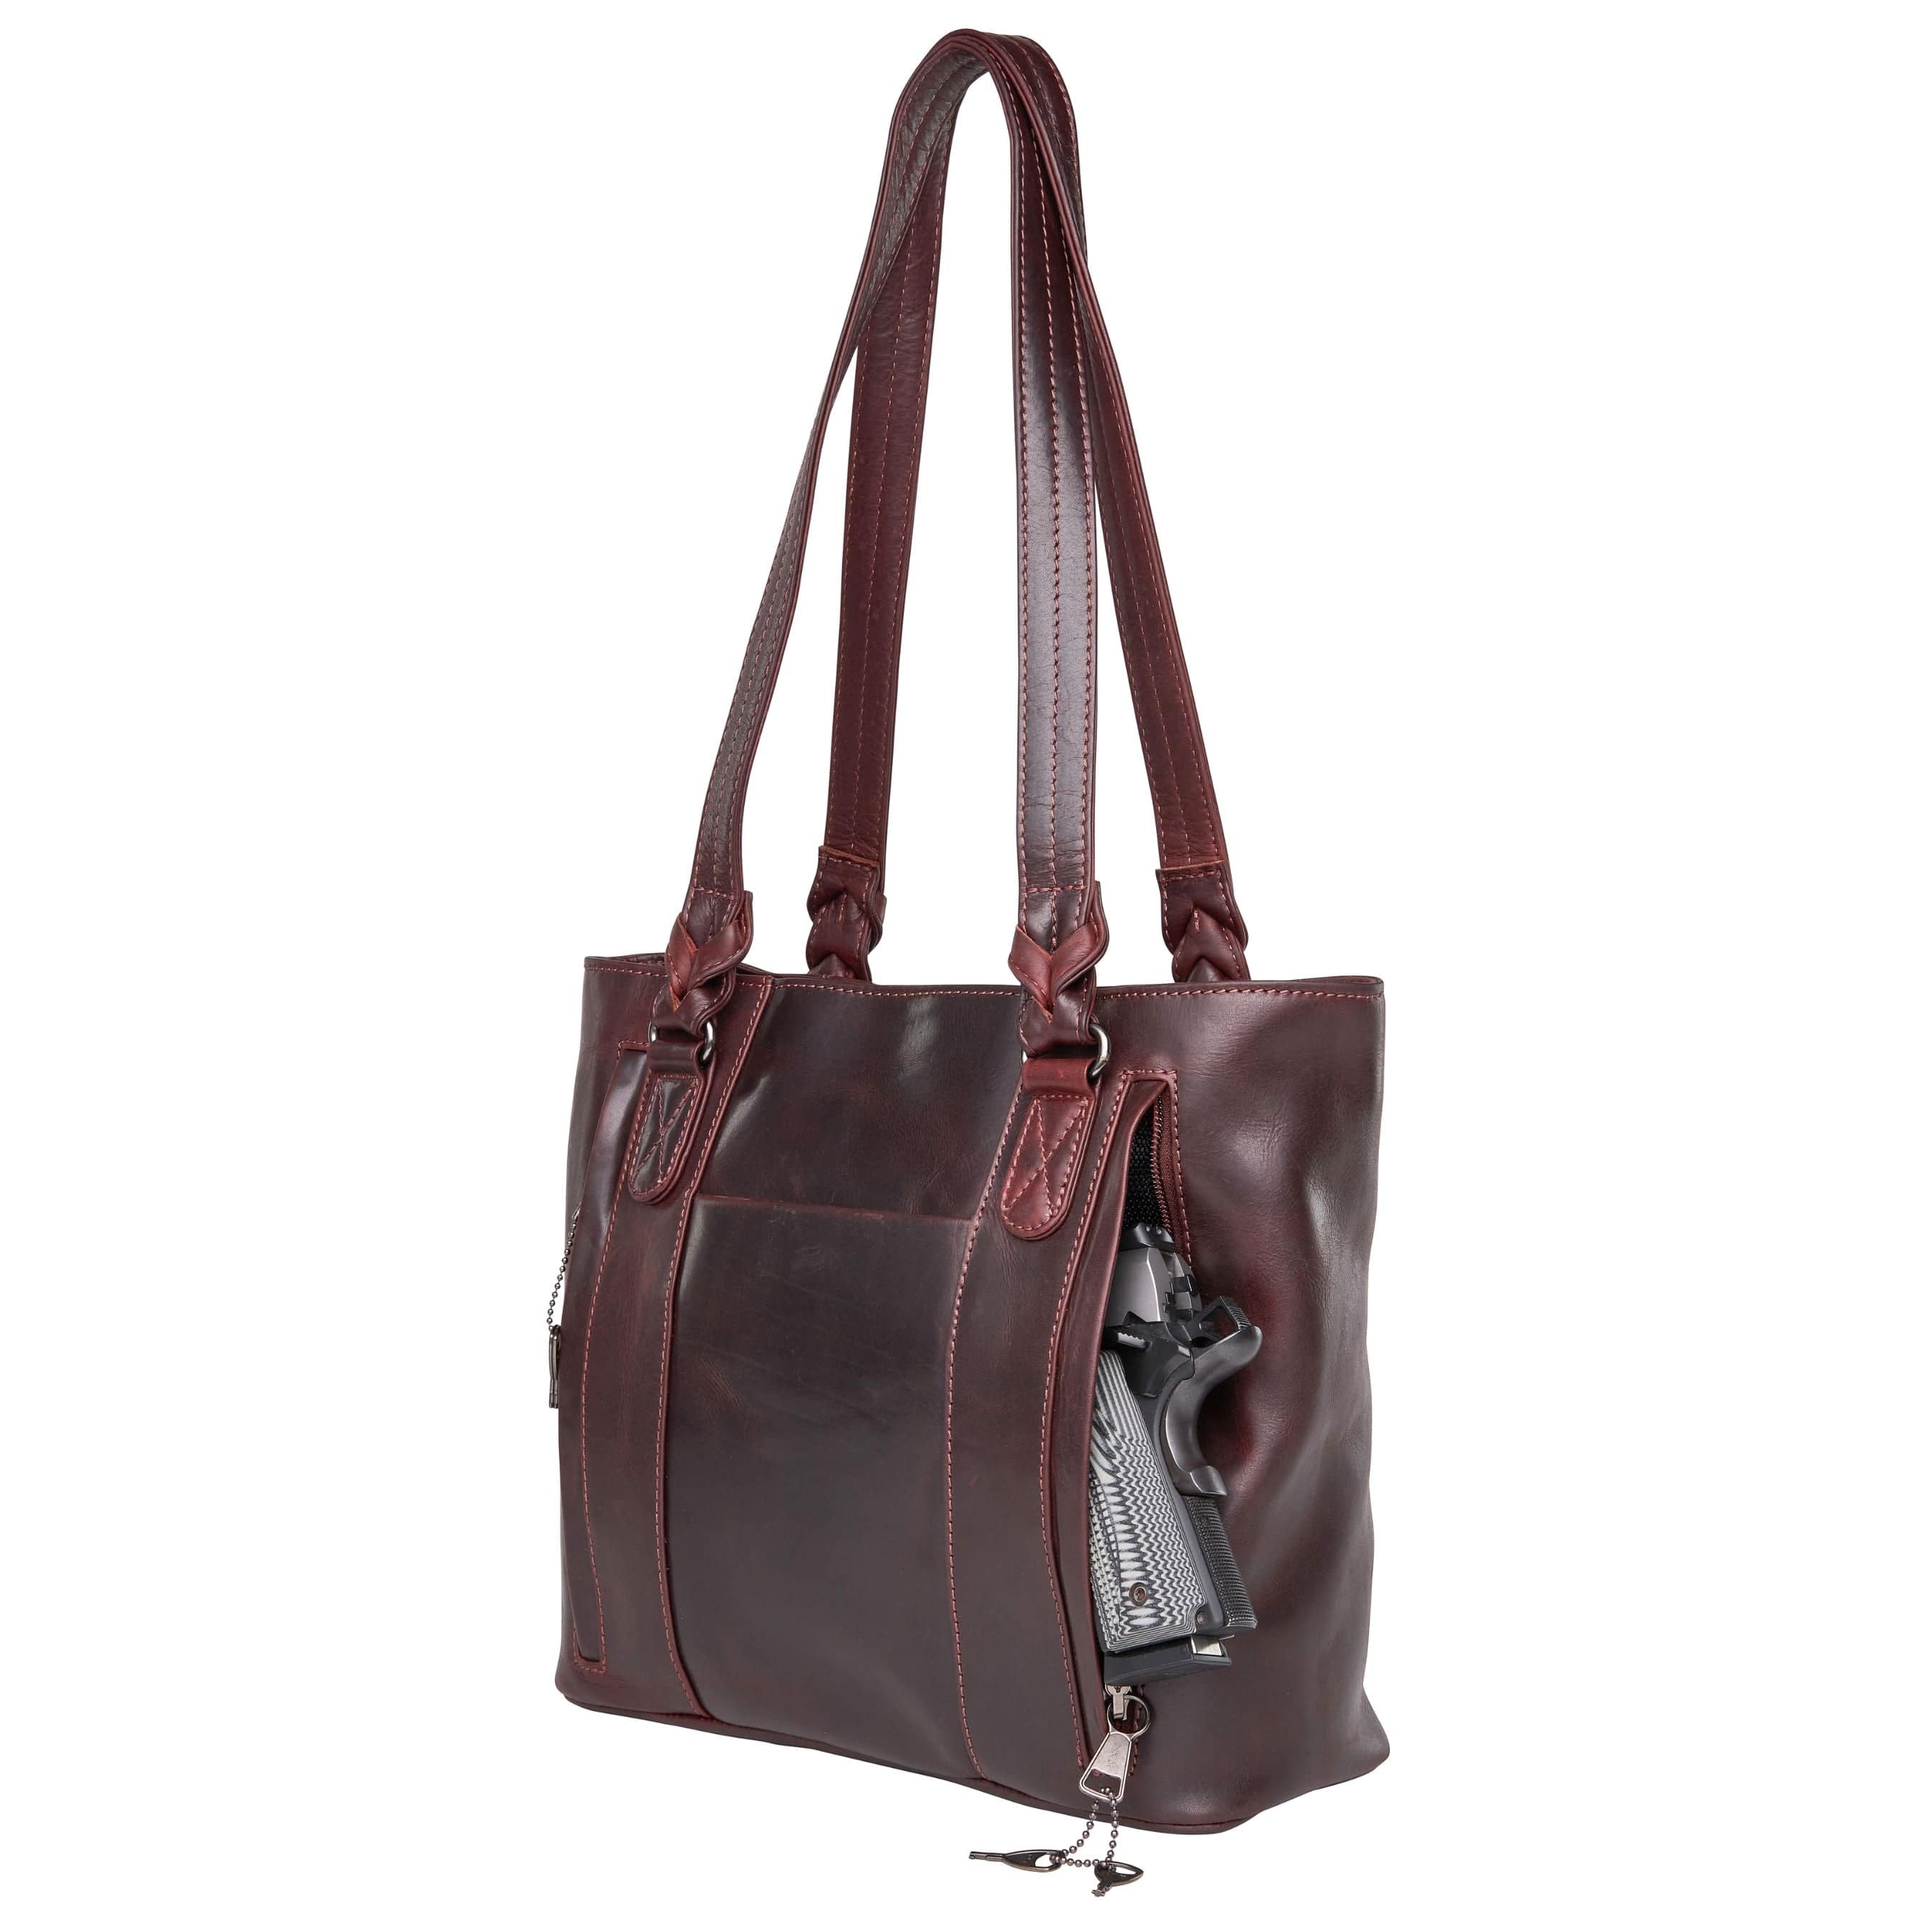 Concealed Carry Peyton Leather Tote for Women Lady Conceal -  YKK Locking & Universal Holster -  Designer Luxury Leather Carry Handbag -  carry Handbag for gun carry -  Unique Tote gun Handbag -  designer backpack purse -  designer purse sale -  designer purse sales -  womens designer purse sale -  Peyton Leather Tote -  designer lady purse concealed carry gun Handbag -   concealed carry Handbag for woman-  Easy Conceal Carry and Draw Purse - 